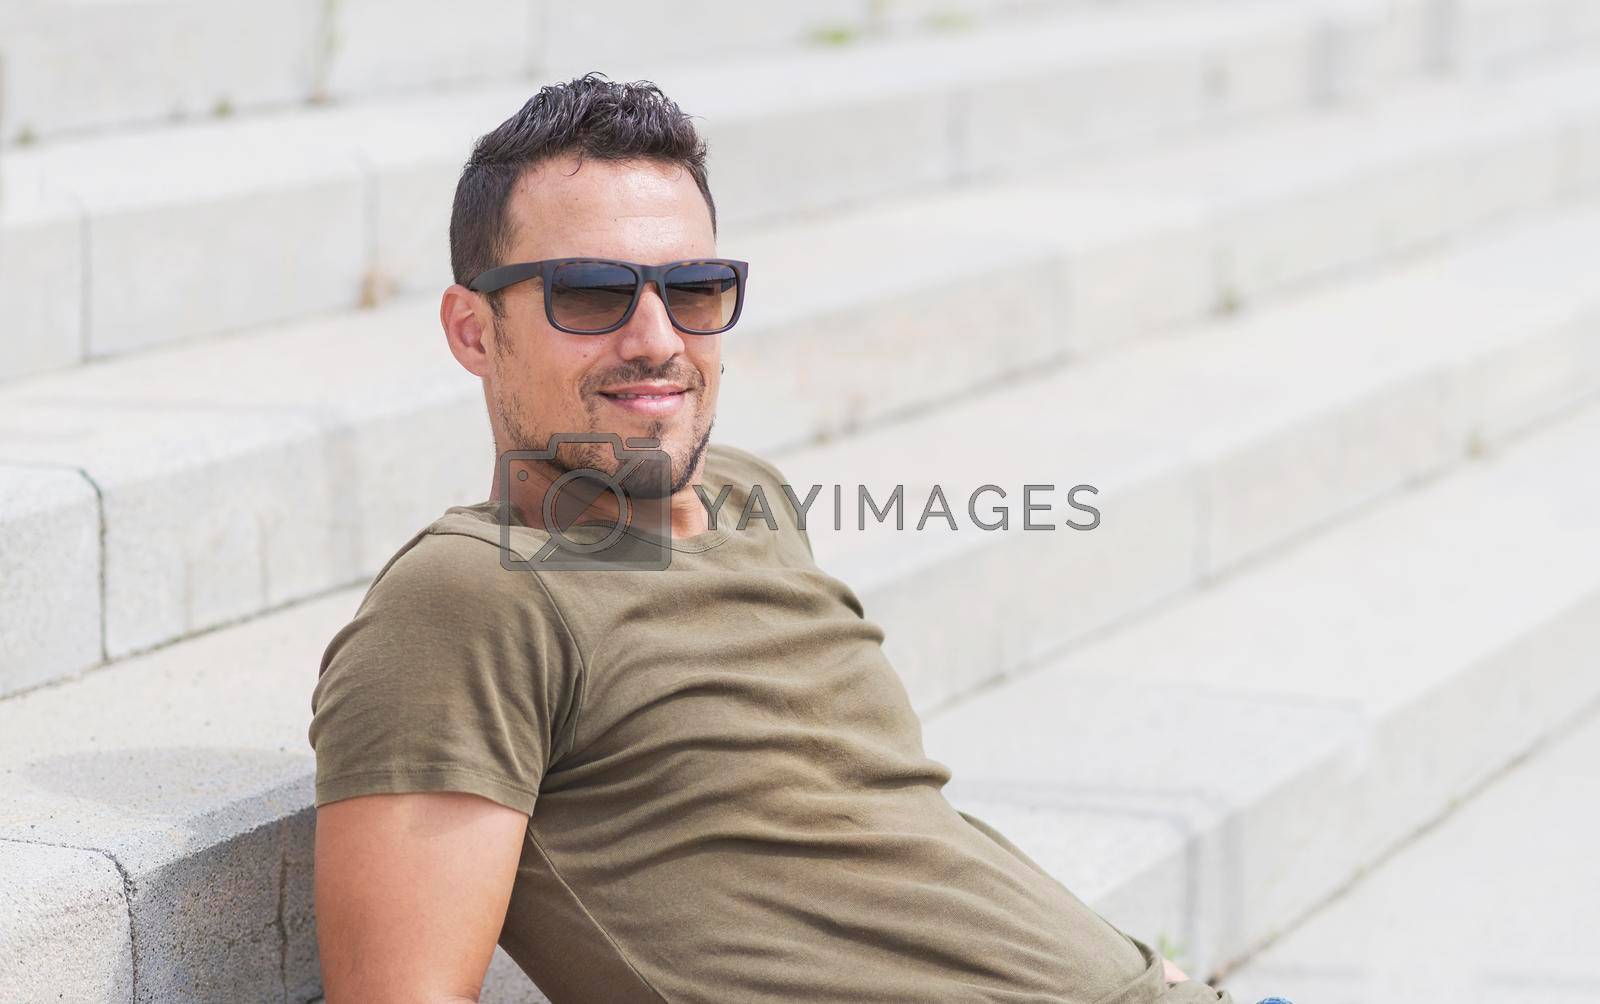 Royalty free image of Man sitting alone on steps. Handsome boy with sunglasses by raferto1973